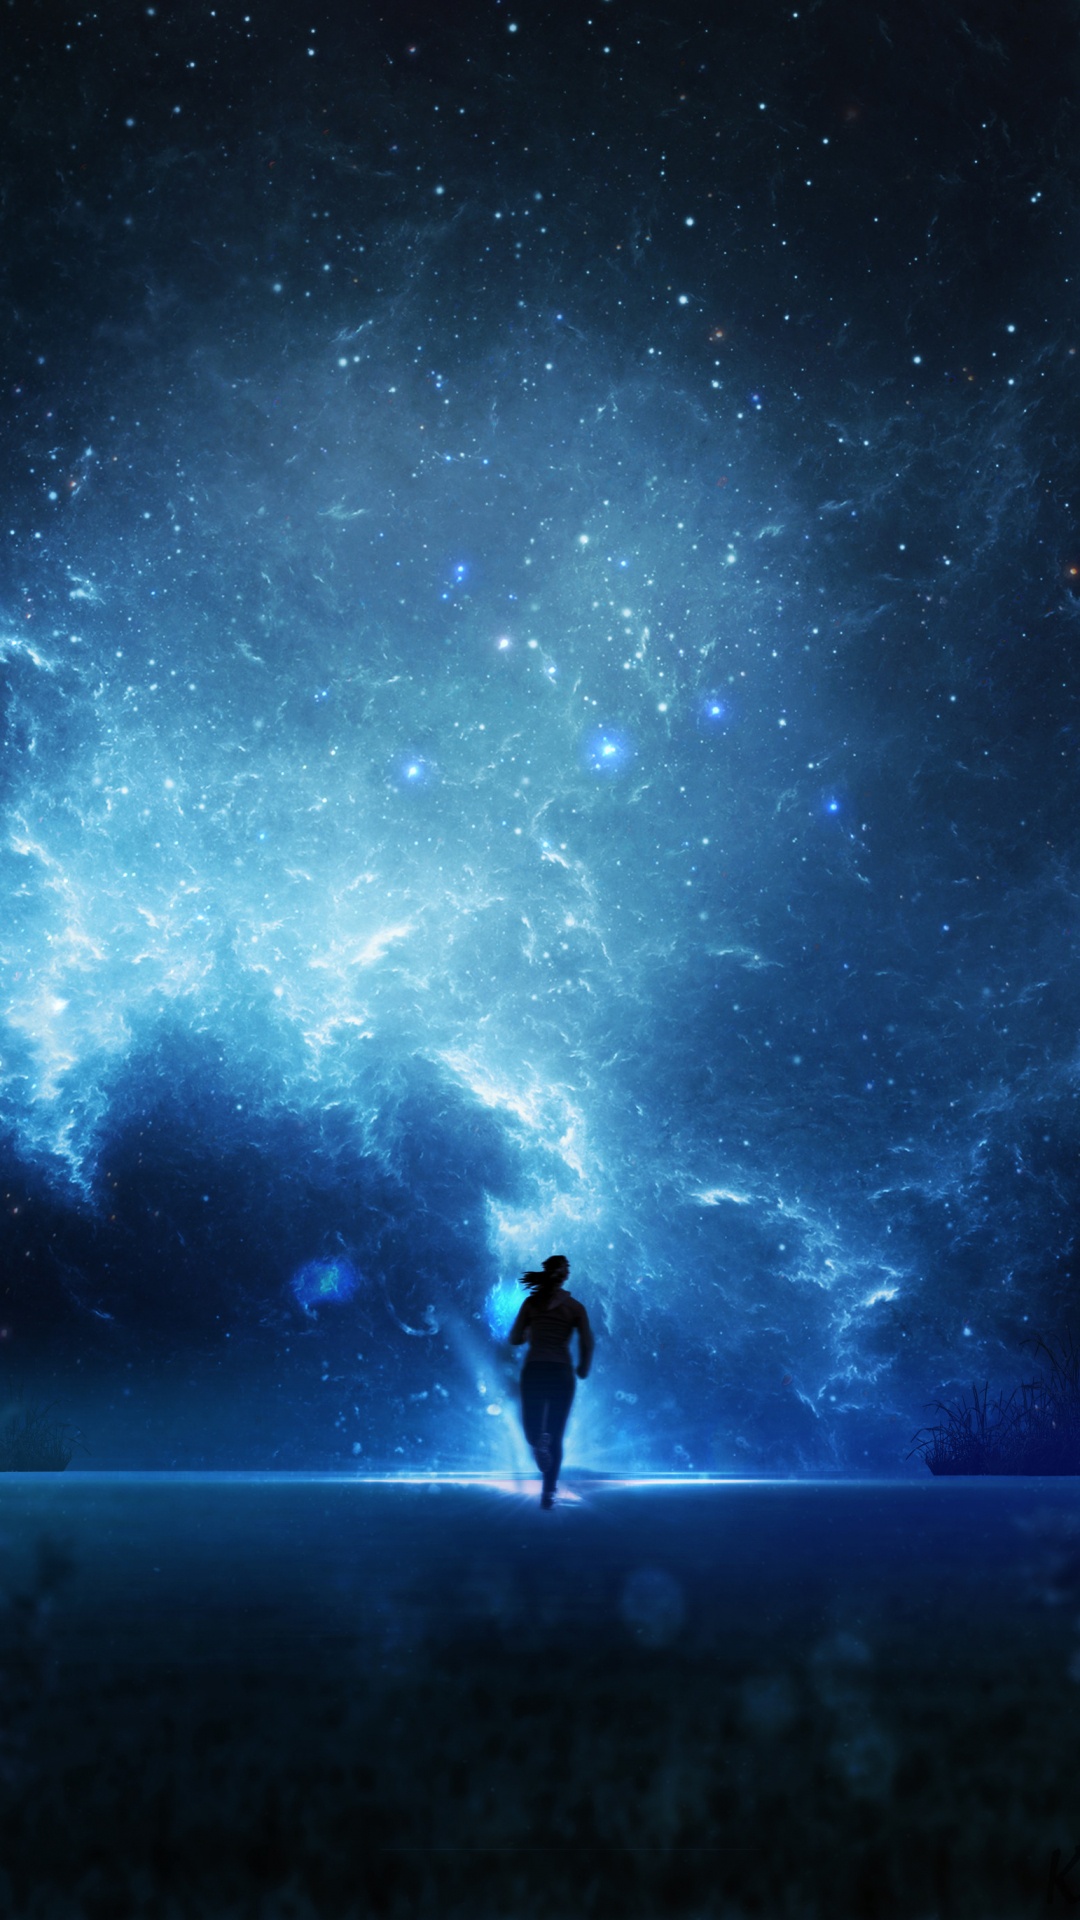 Man in Black Jacket and Pants Standing on Black Rock Under Starry Night. Wallpaper in 1080x1920 Resolution